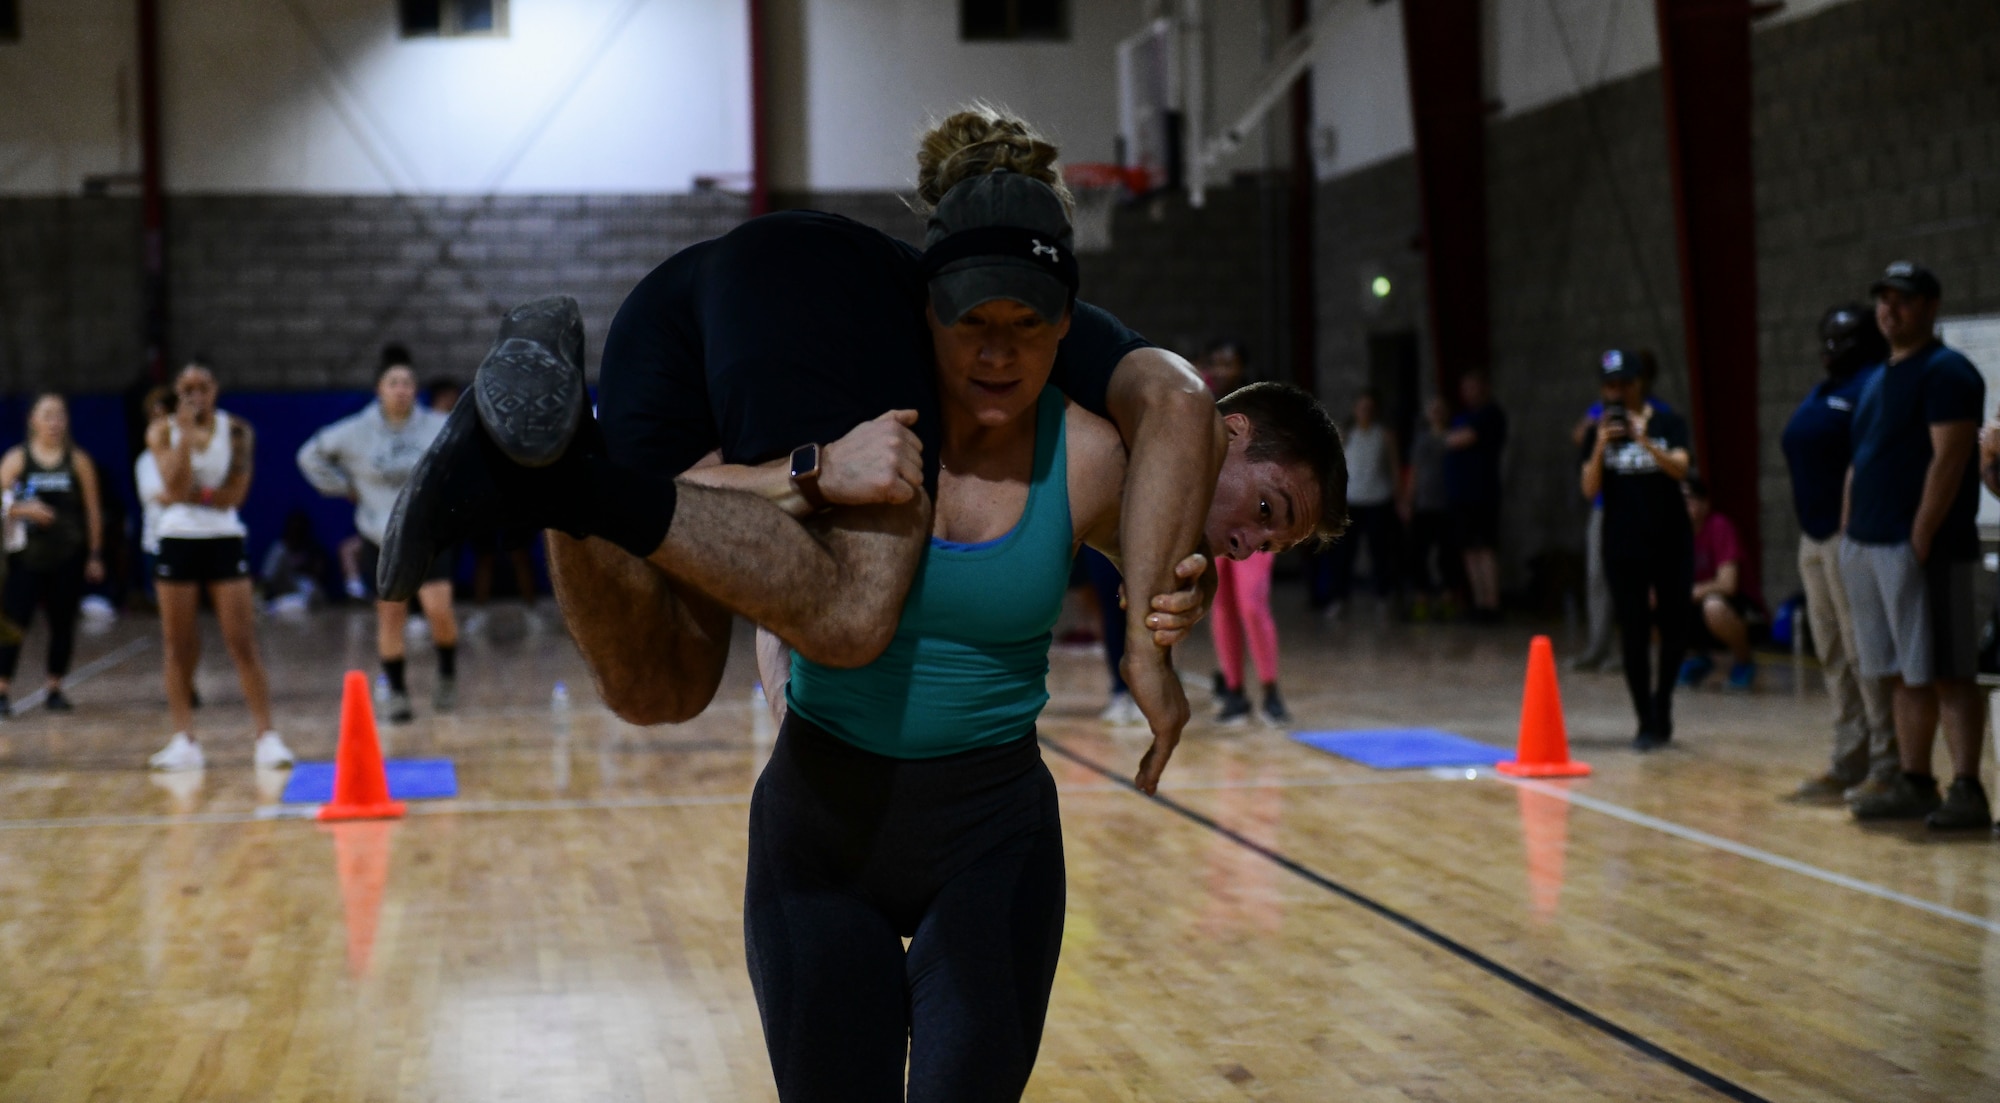 Airman carries wingman during fitness event.